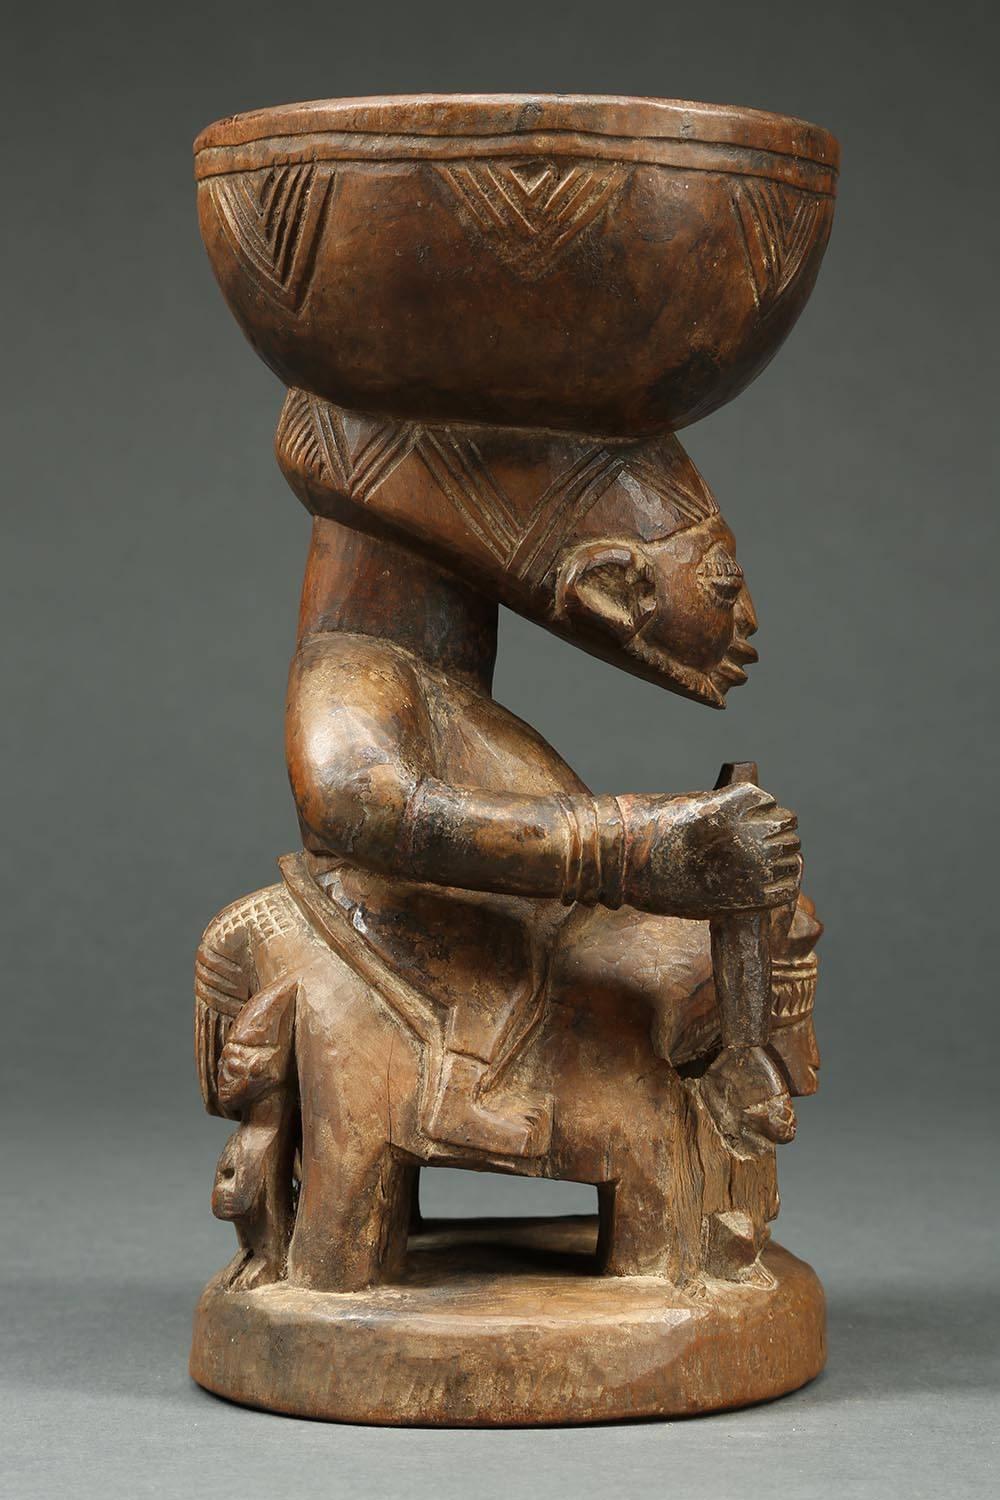 Nigerian Yoruba Tribal Offering Bowl with Horse and Rider, Nigeria